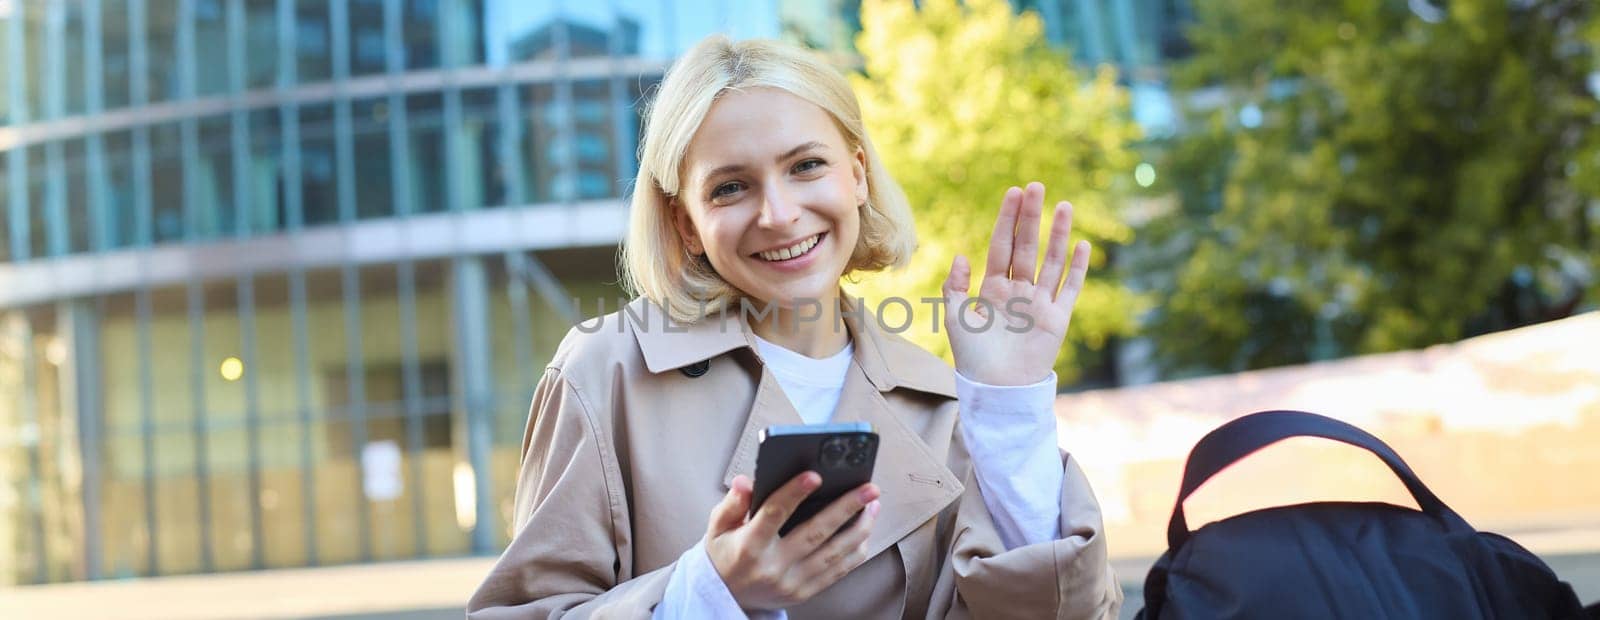 Portrait of young blonde college girl, student sitting on street bench, holding smartphone, seeing a friend and waving hand to say hello, smiling friendly at camera.